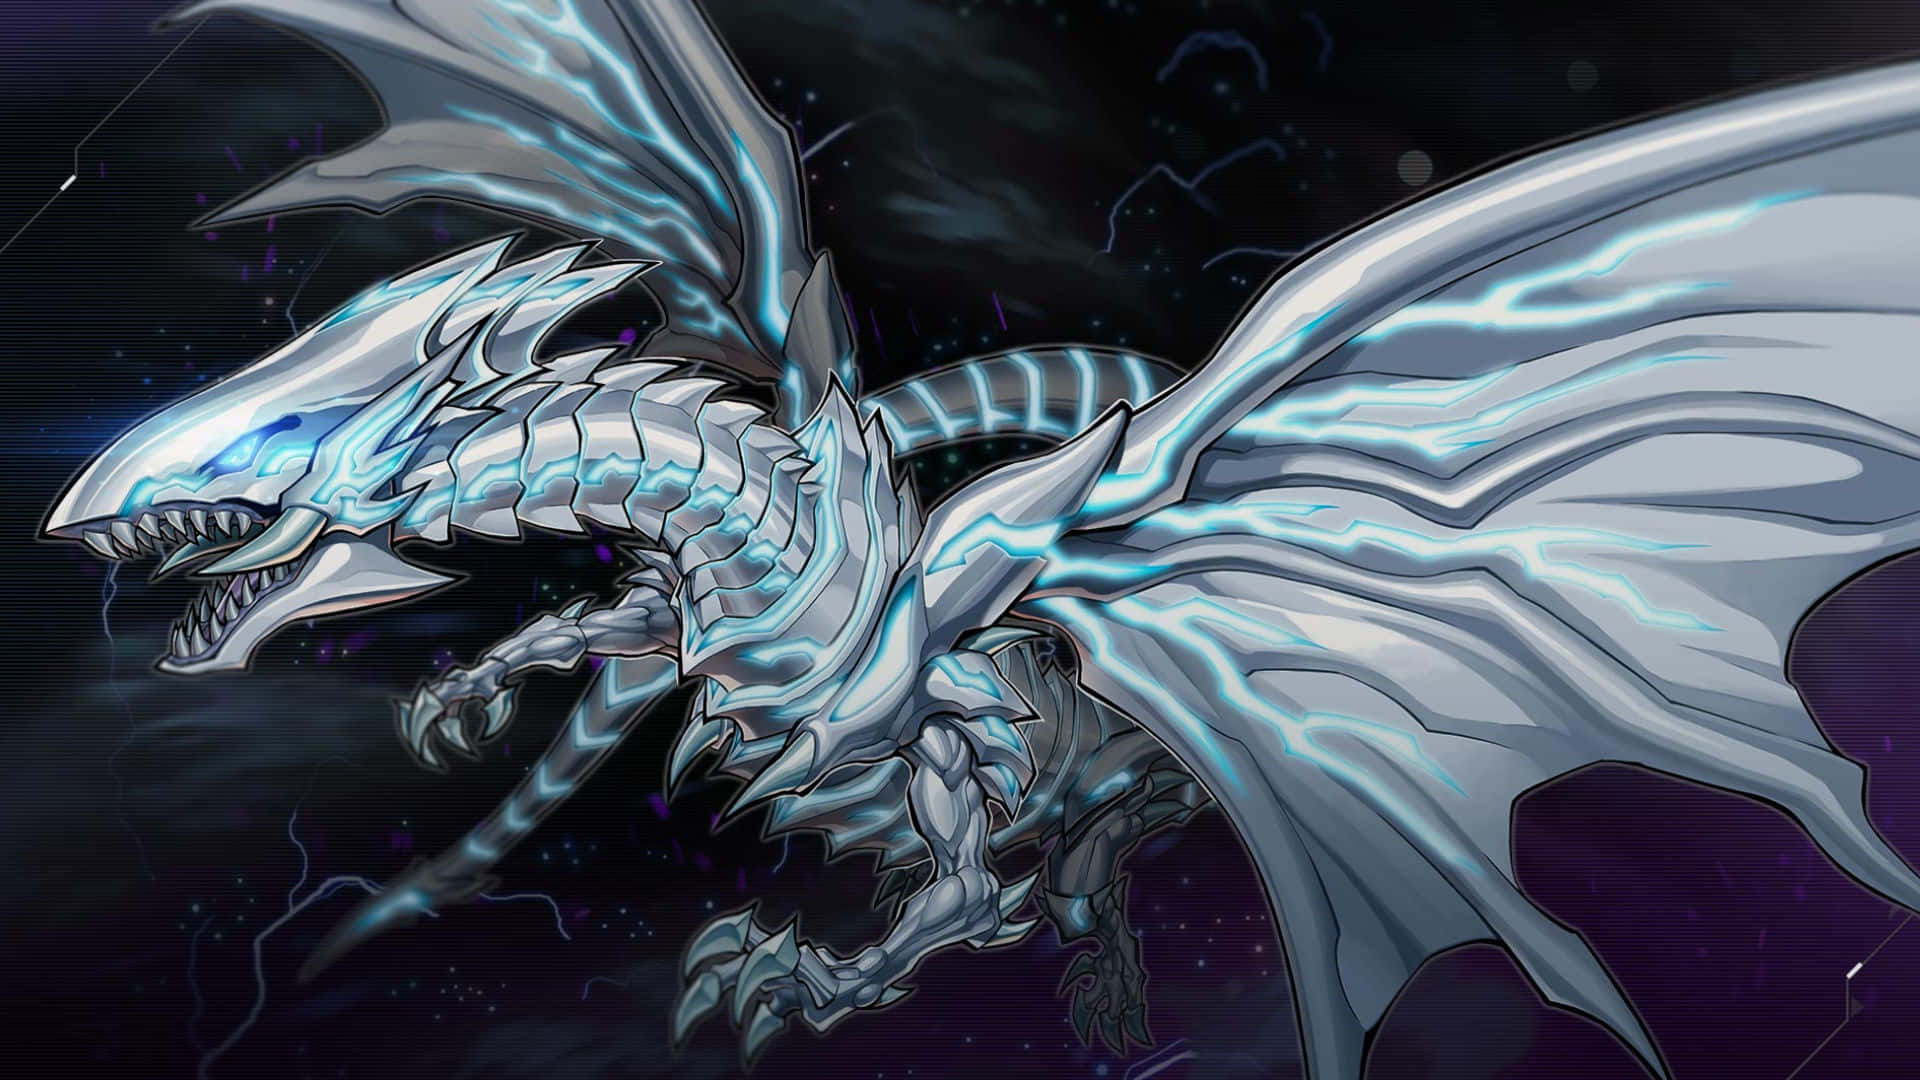 A White Dragon With Blue Wings Flying In The Sky